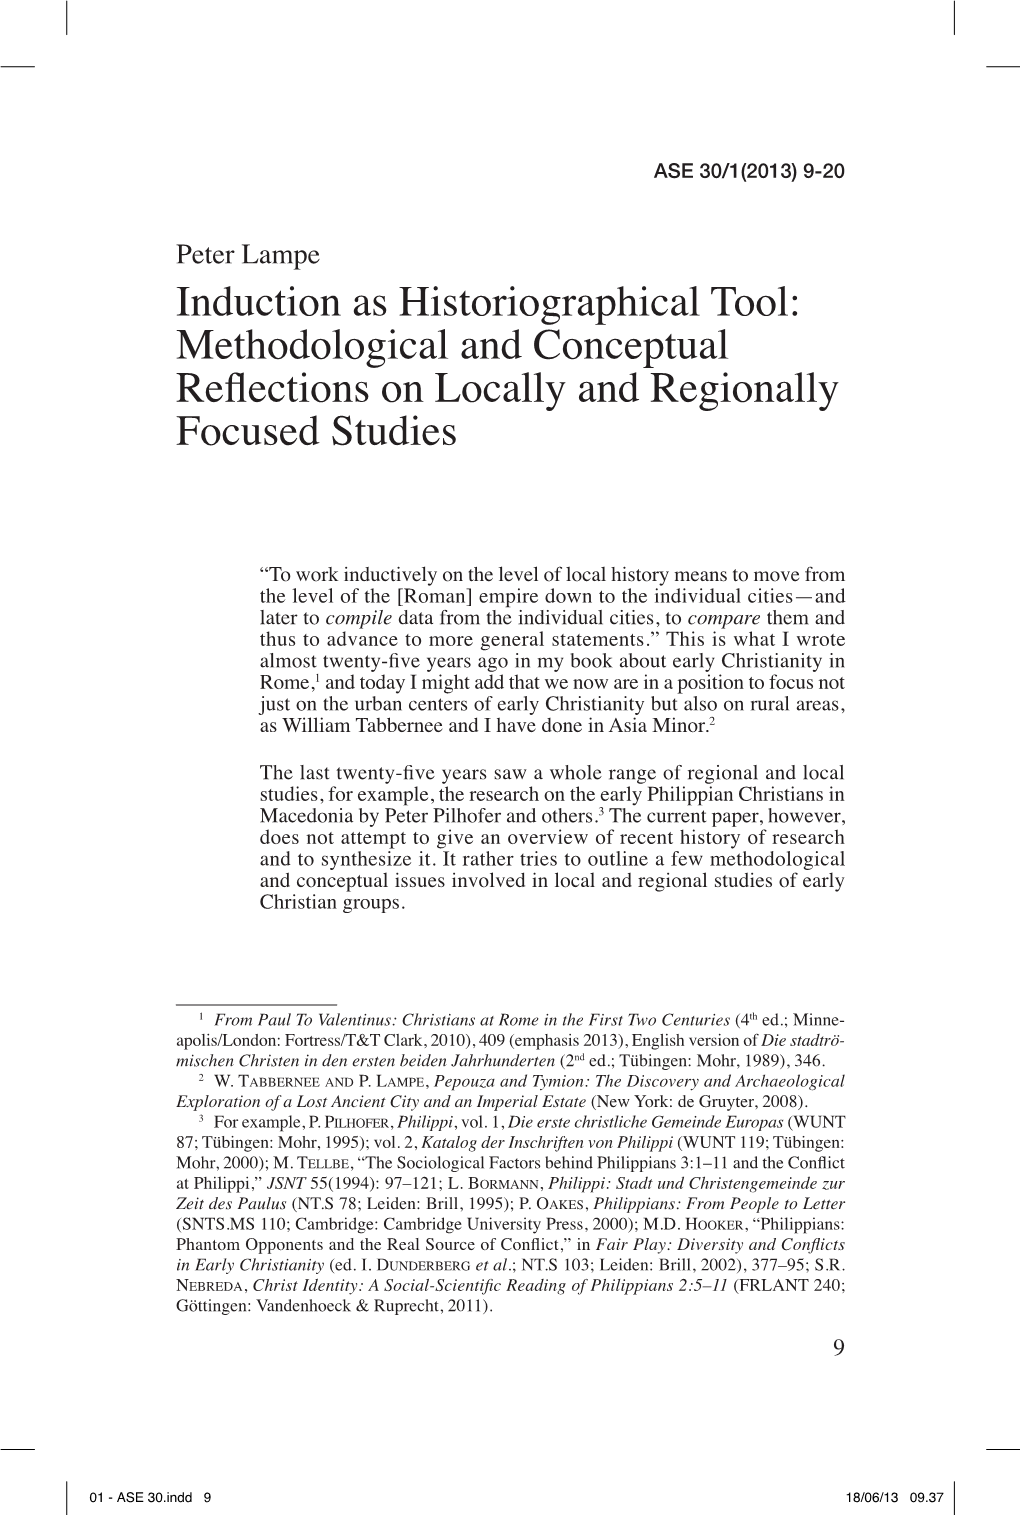 Induction As Historiographical Tool: Methodological and Conceptual Reflections on Locally and Regionally Focused Studies